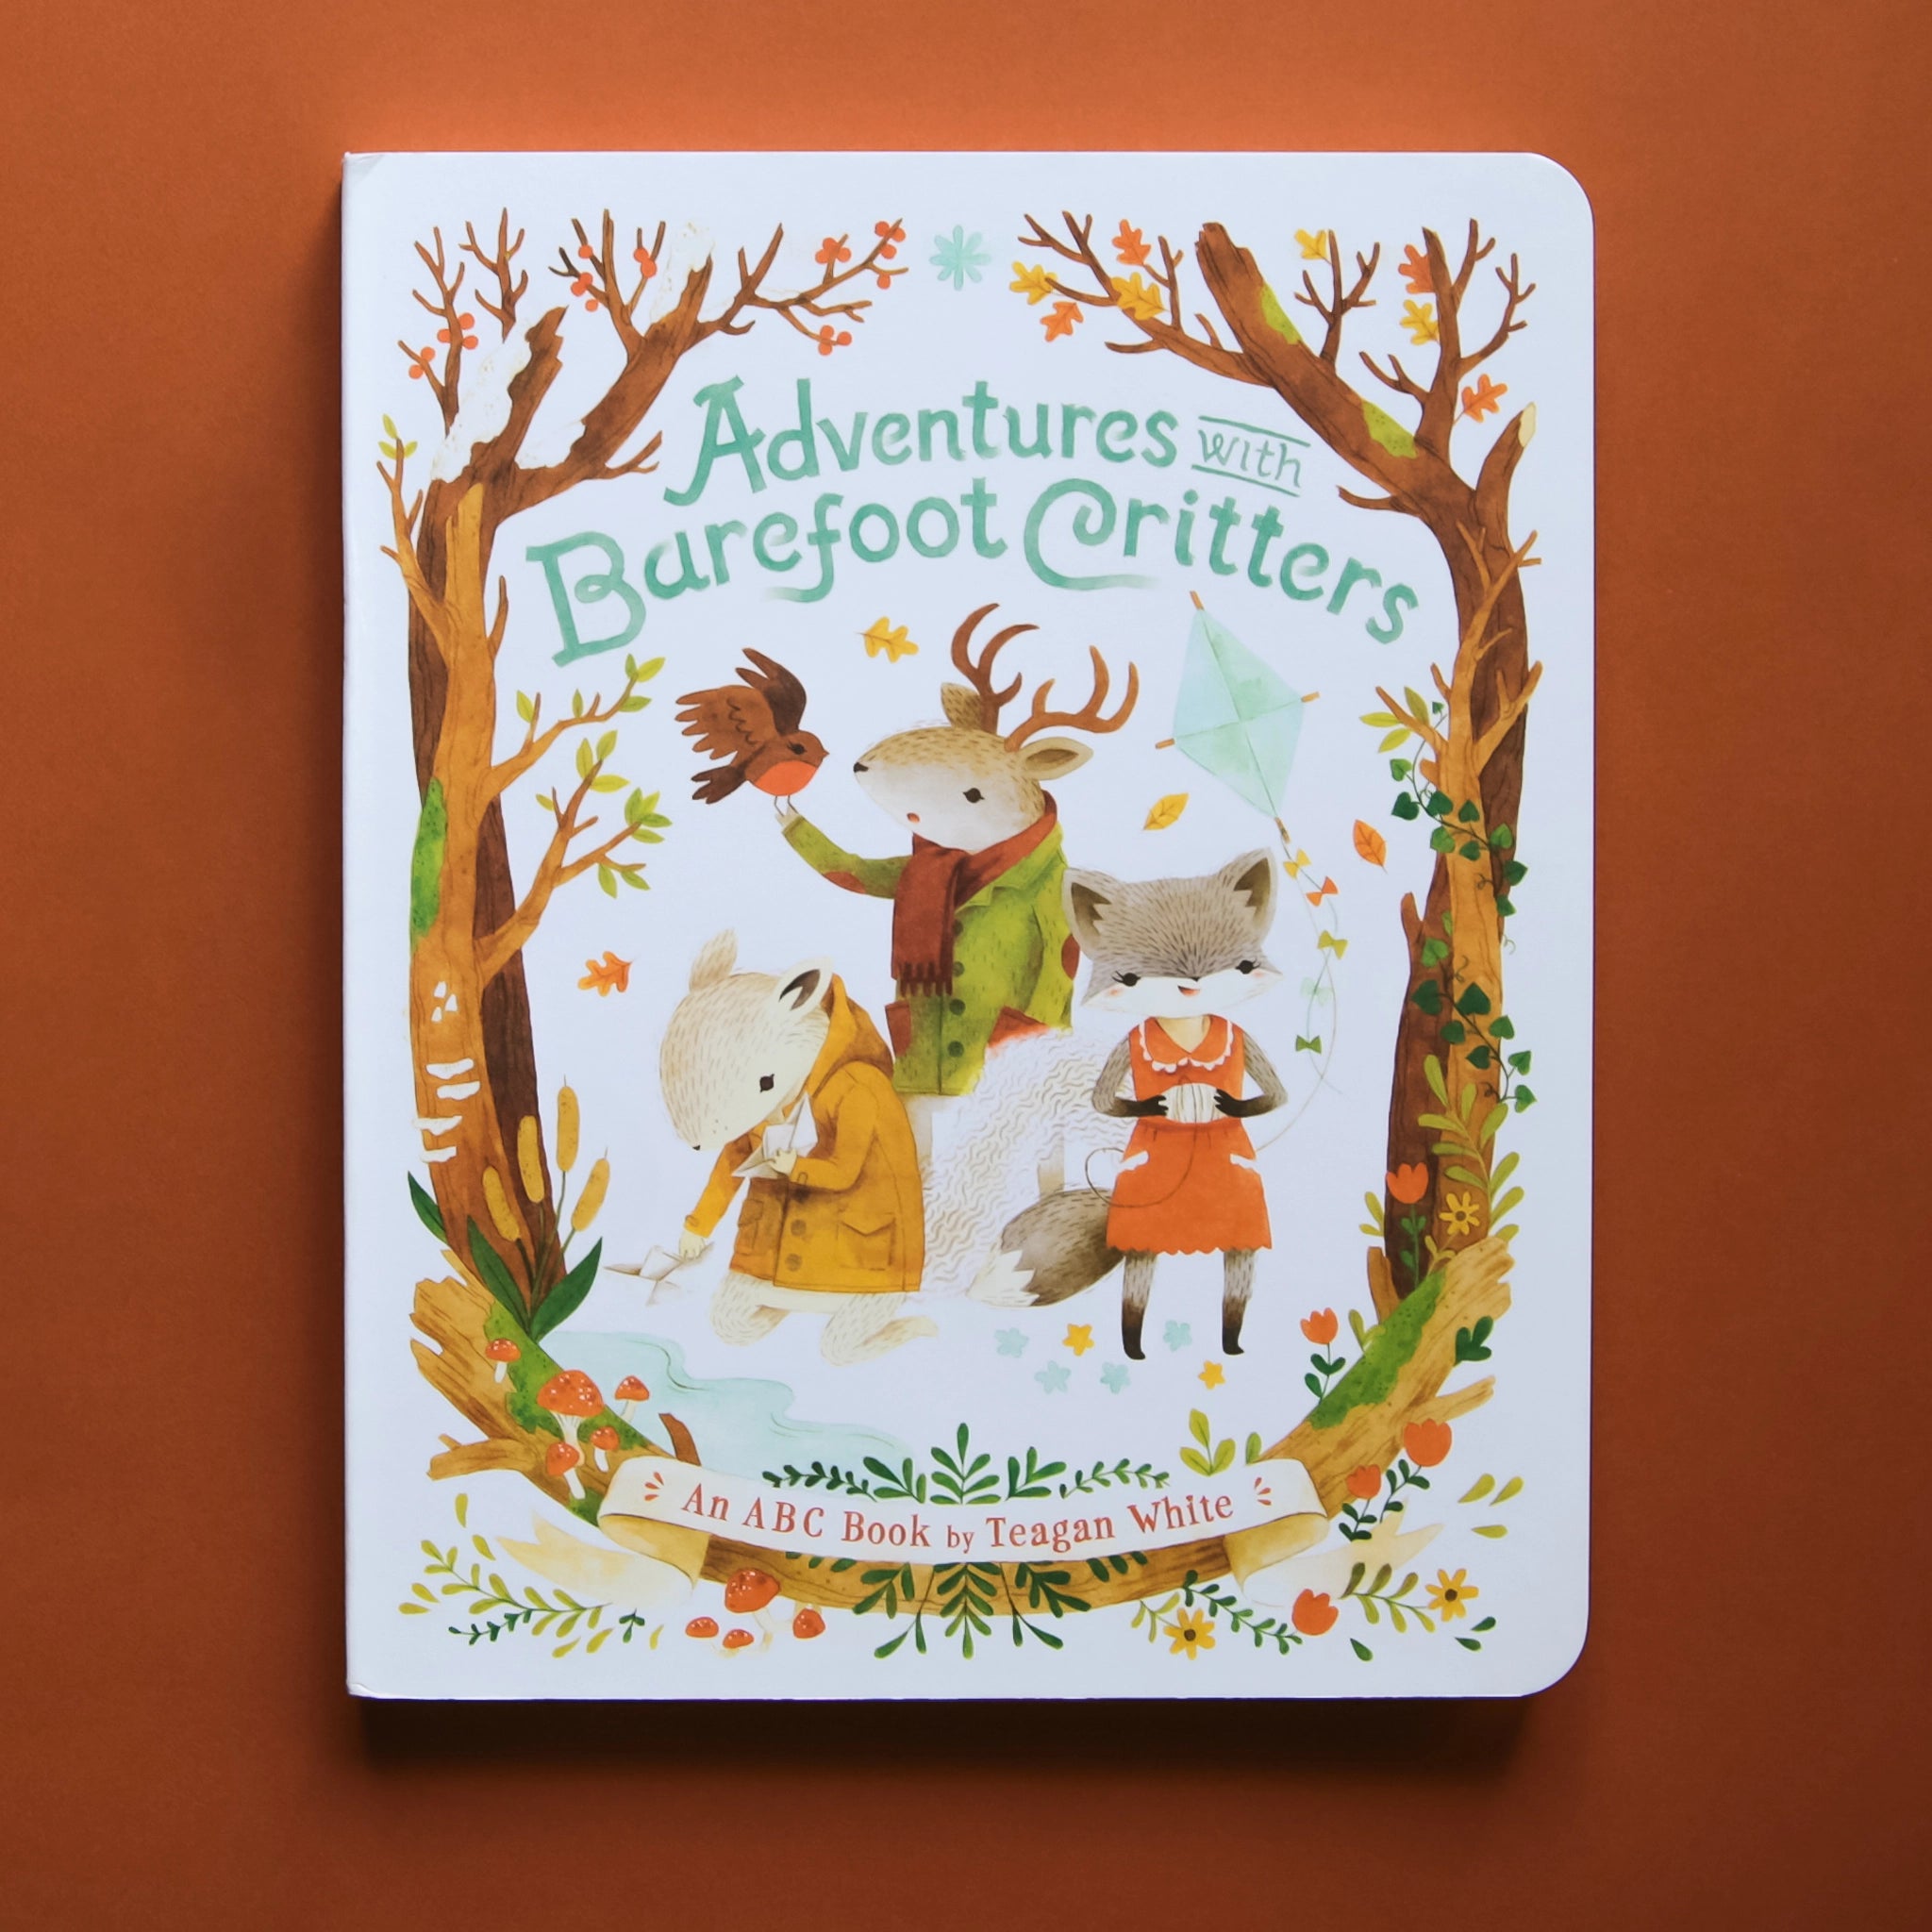 An illustrated children&#39;s book titled &quot;Adventures with Barefoot Critters - an ABC Book by Teagan White&quot;. Cover illustration shows water color style woods with person-like woodland creatures including a fox, deer and squirrel wearing clothes.